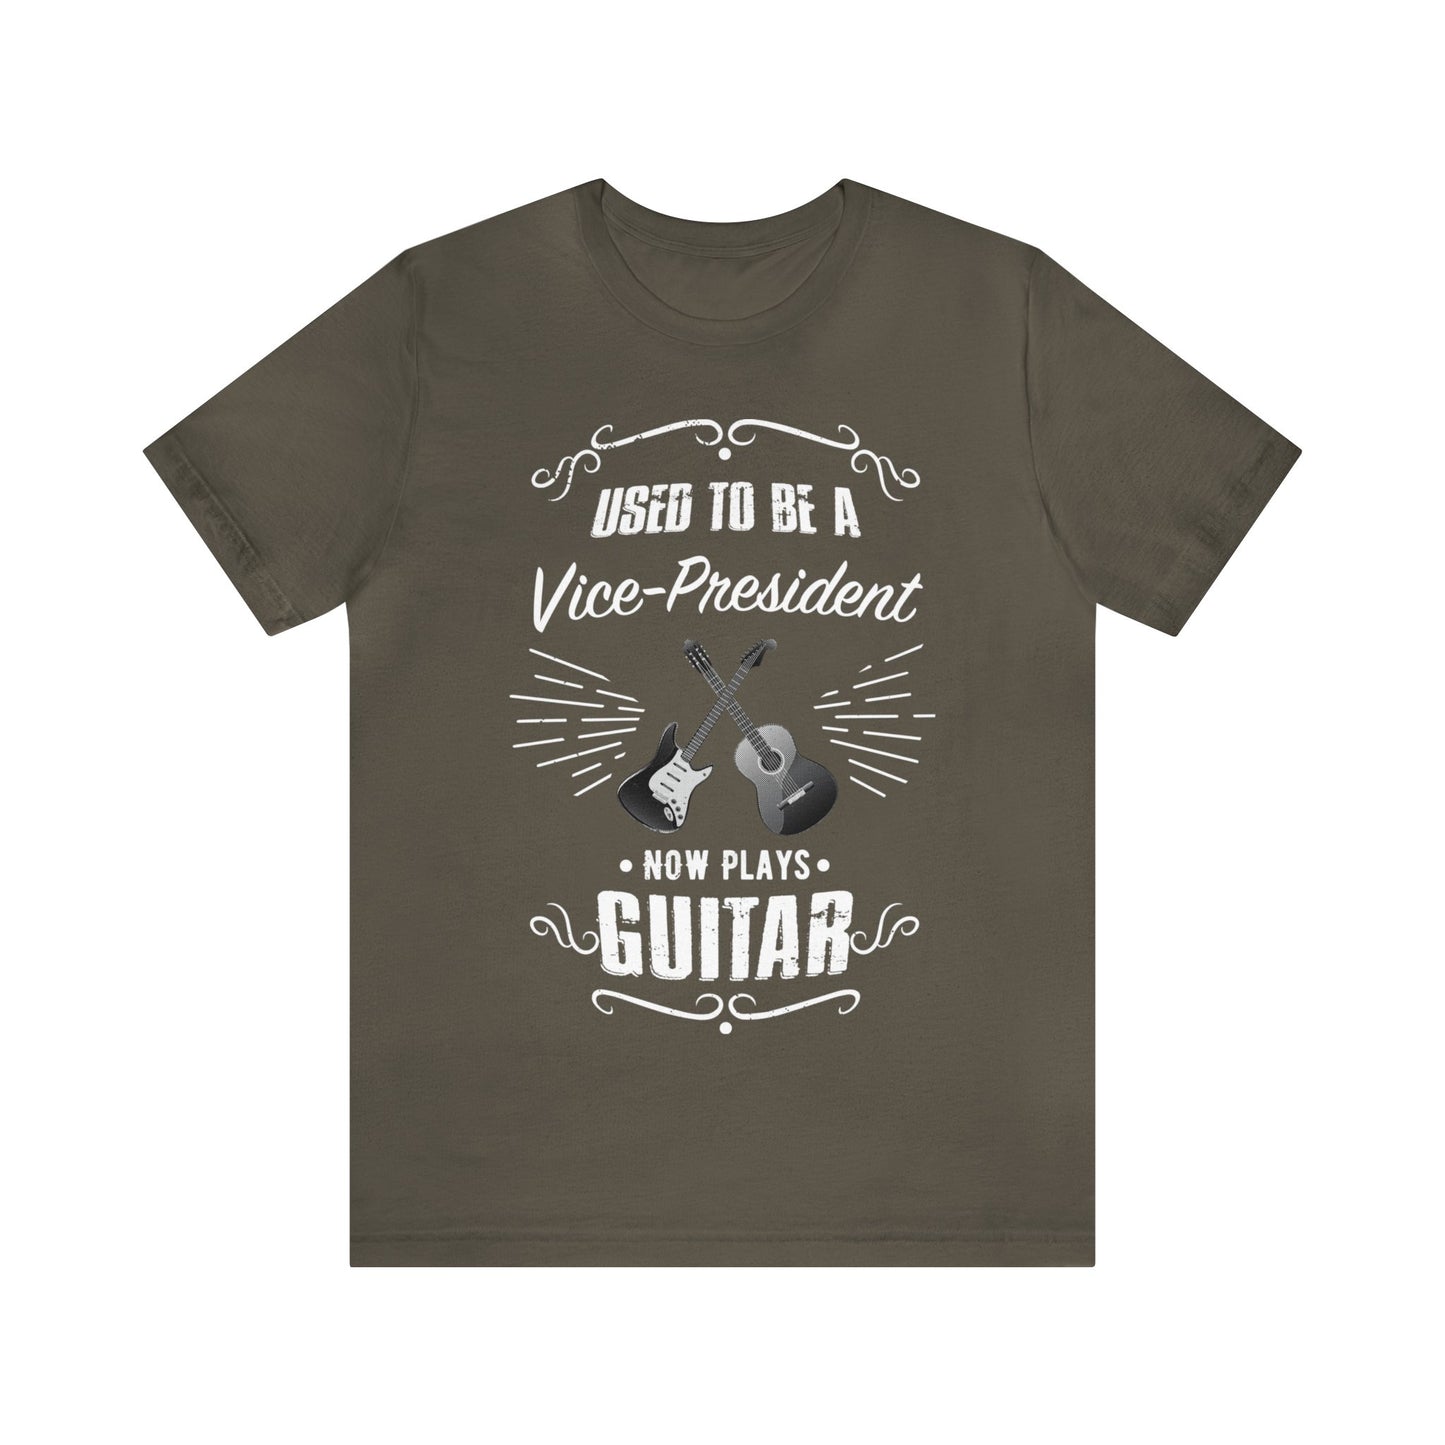 Used to be a VICE PRESIDENT; Now Plays GUITAR - Funny Retirement Gift, Unisex T-shirt Bella+Canvas 3001, dark colors for amateur musician/guitar player